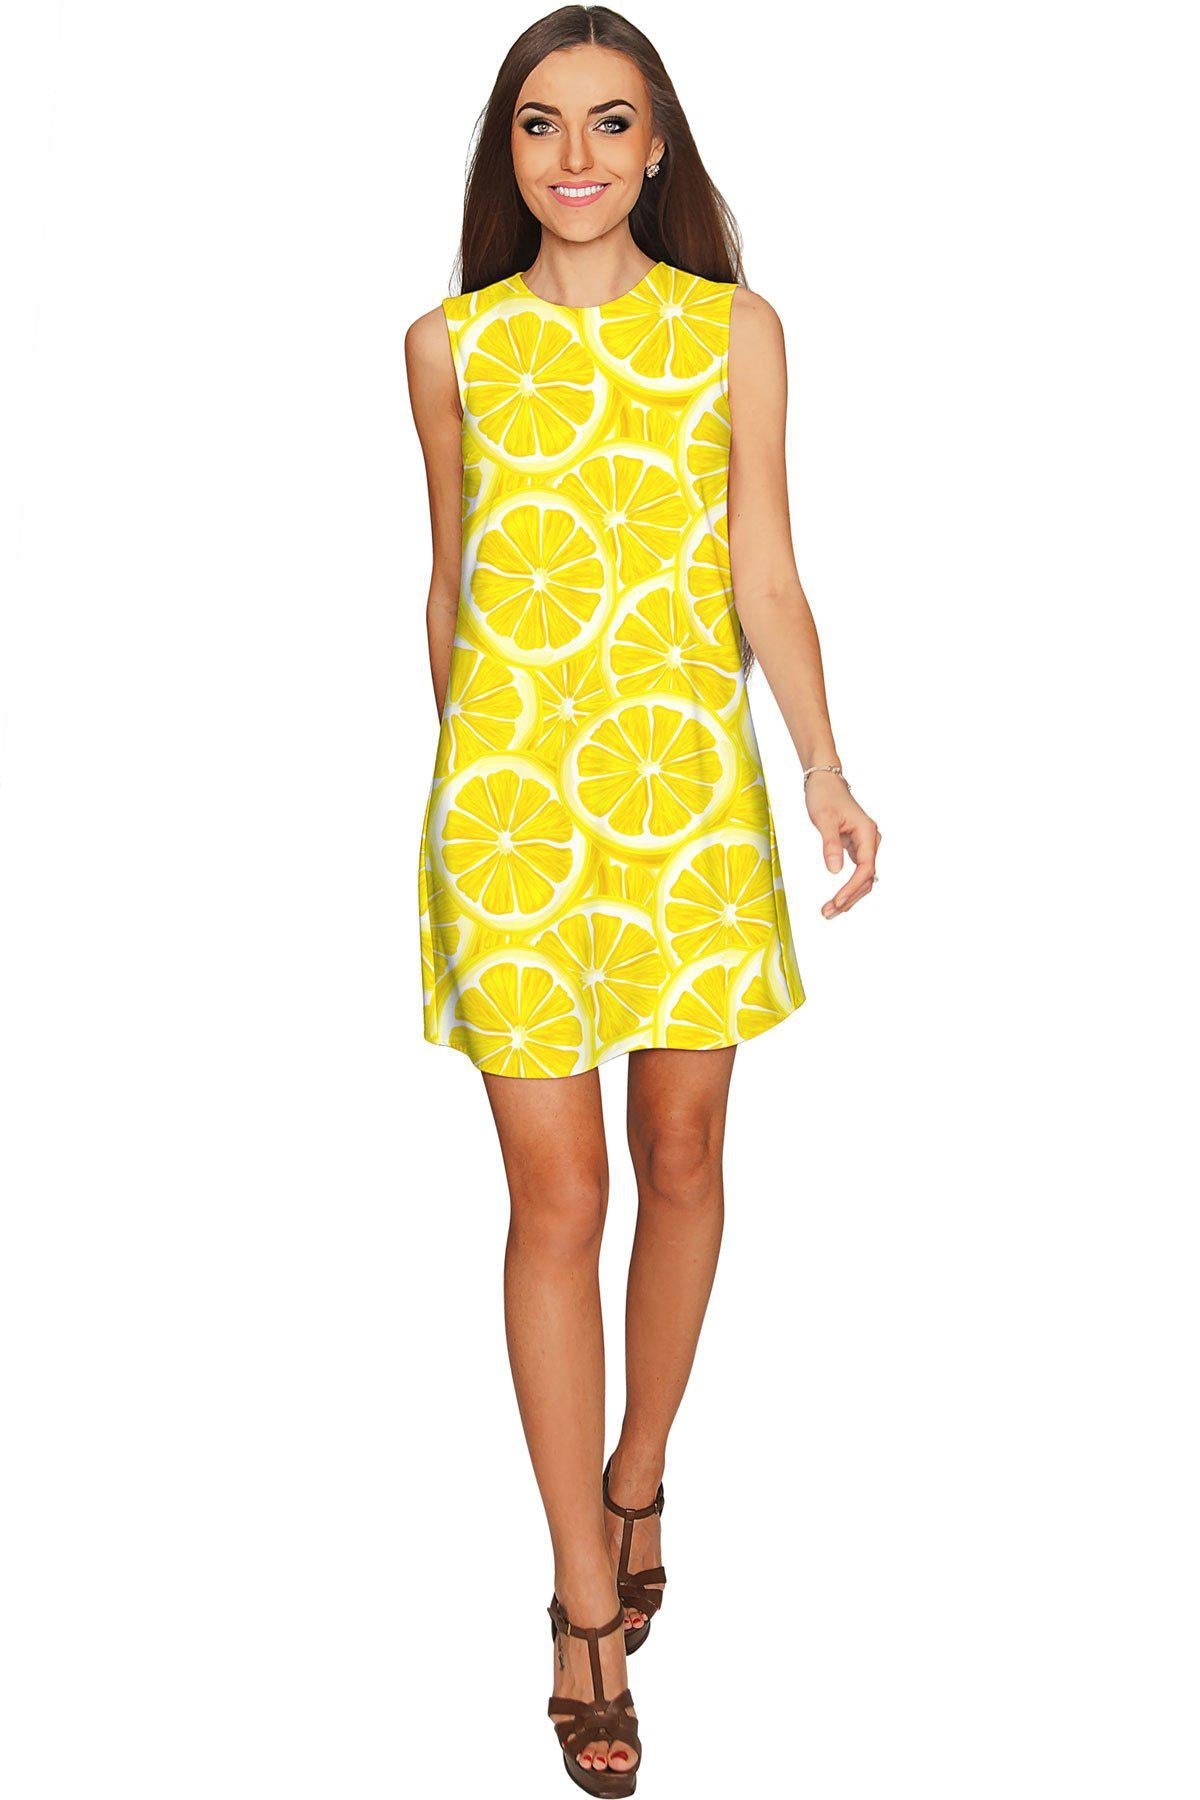 3 for $49! A Piece of Sun Adele Bright Yellow Printed Shift Dress - Women - Pineapple Clothing